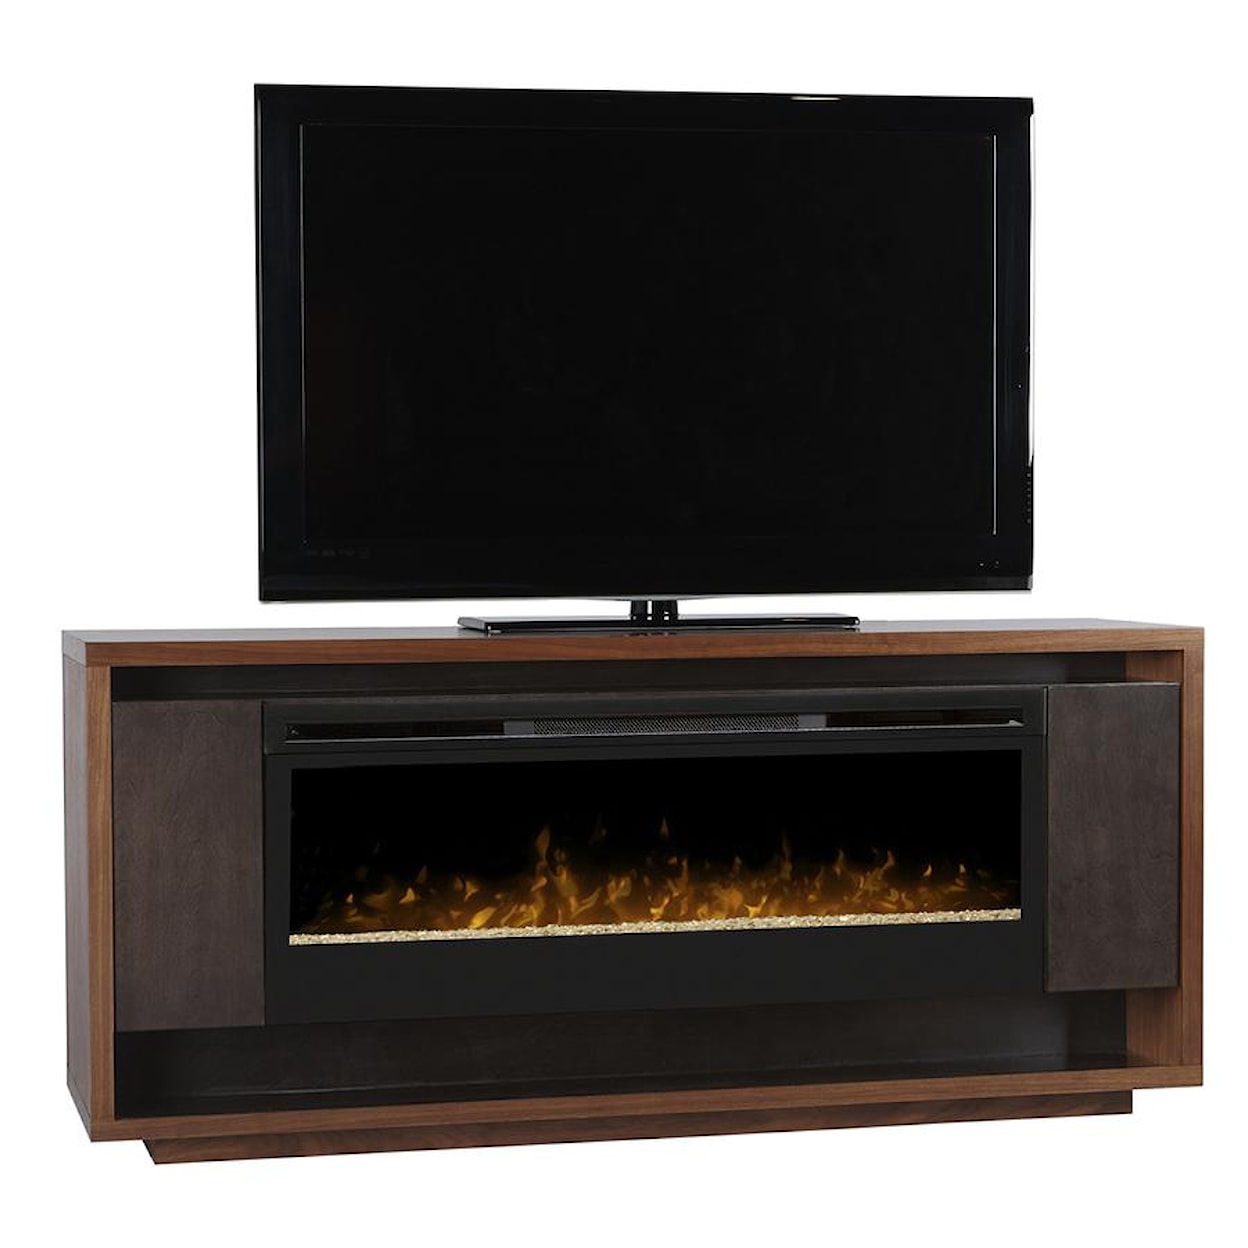 Dimplex Maddock Media Console with Fireplace